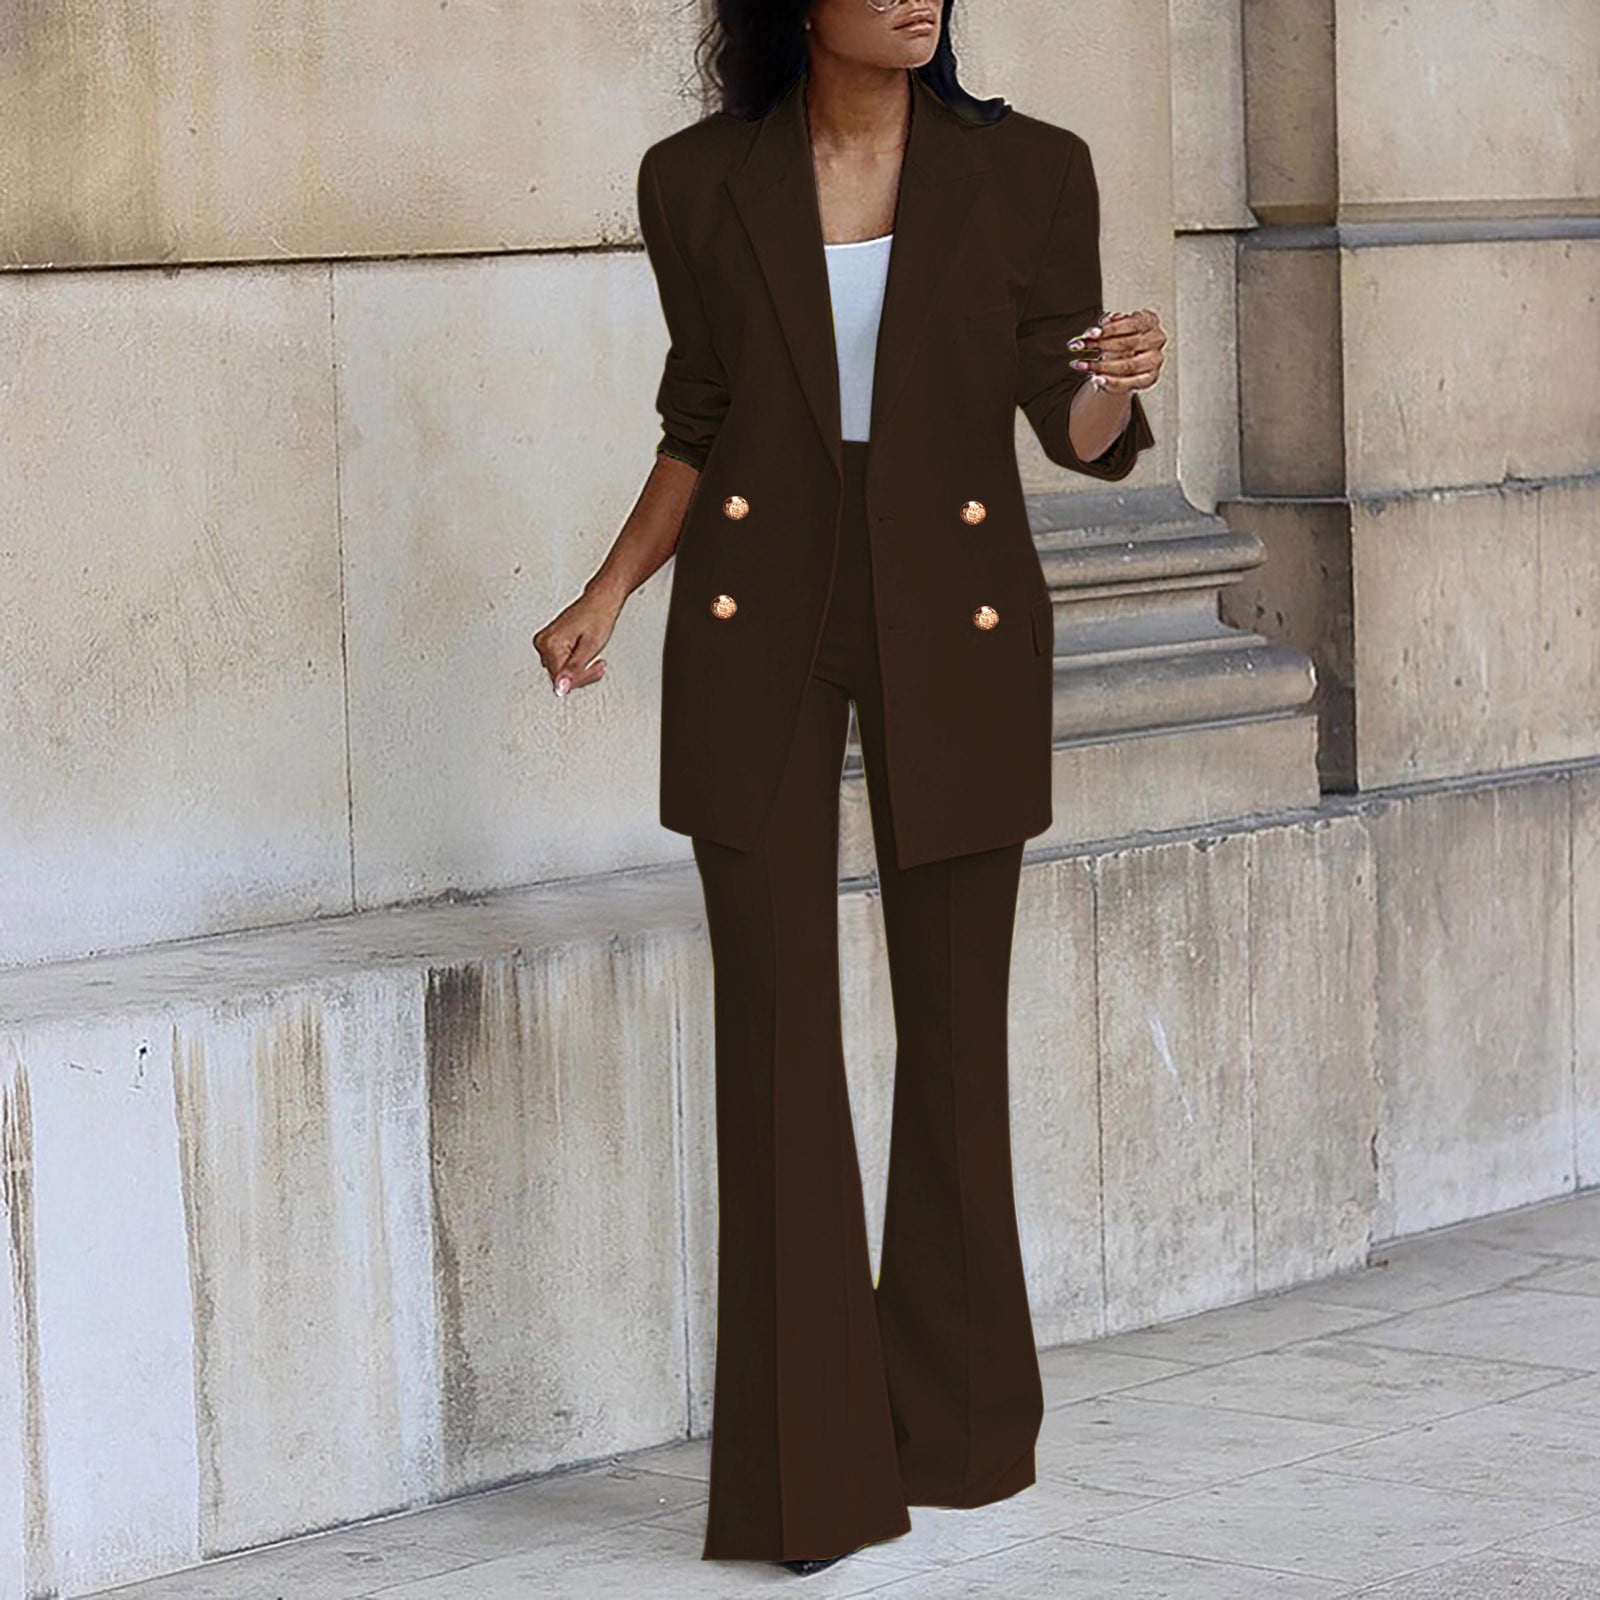 Leesechin Womens Blazer Long Sleeve Solid Suit Pants Casual Elegant  Business Suit Sets on Clearance 